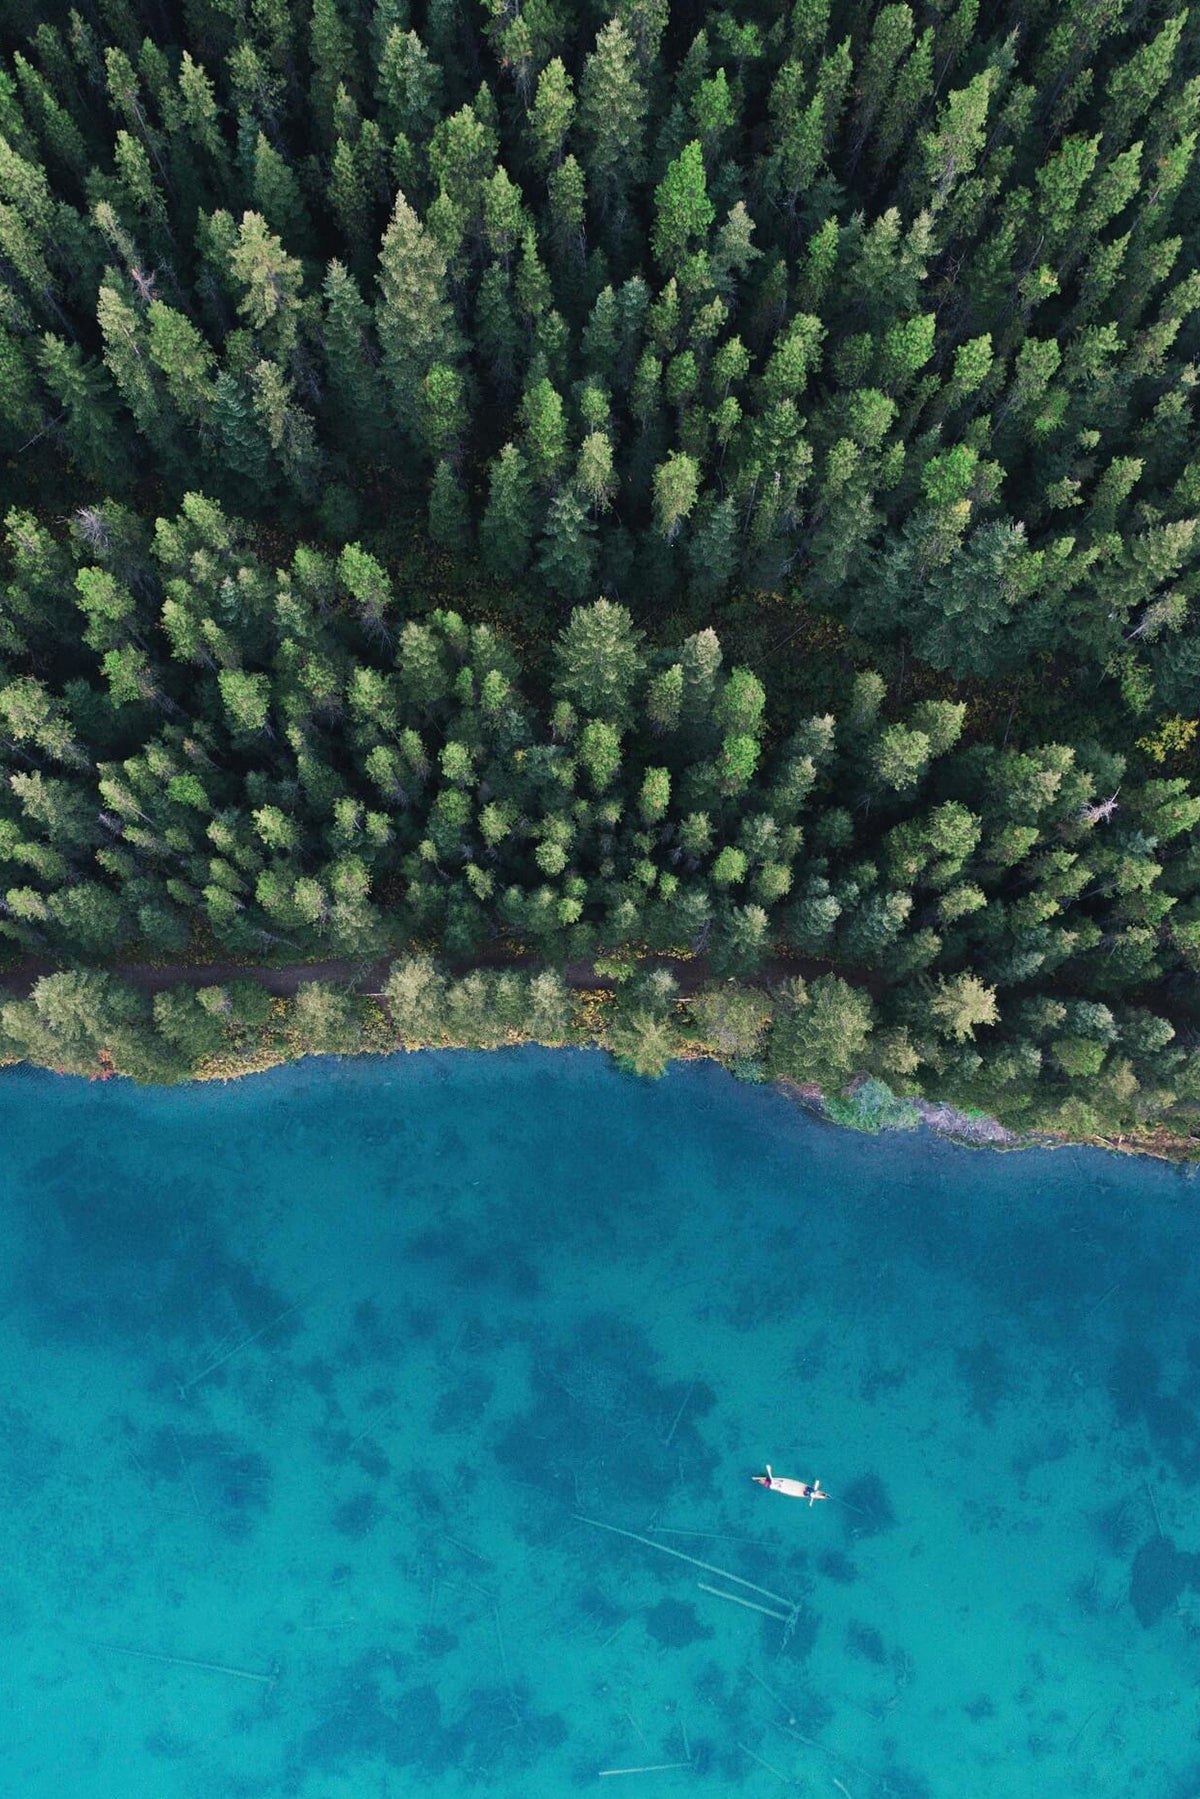 Drone photo by Dirk Dallas of water and trees